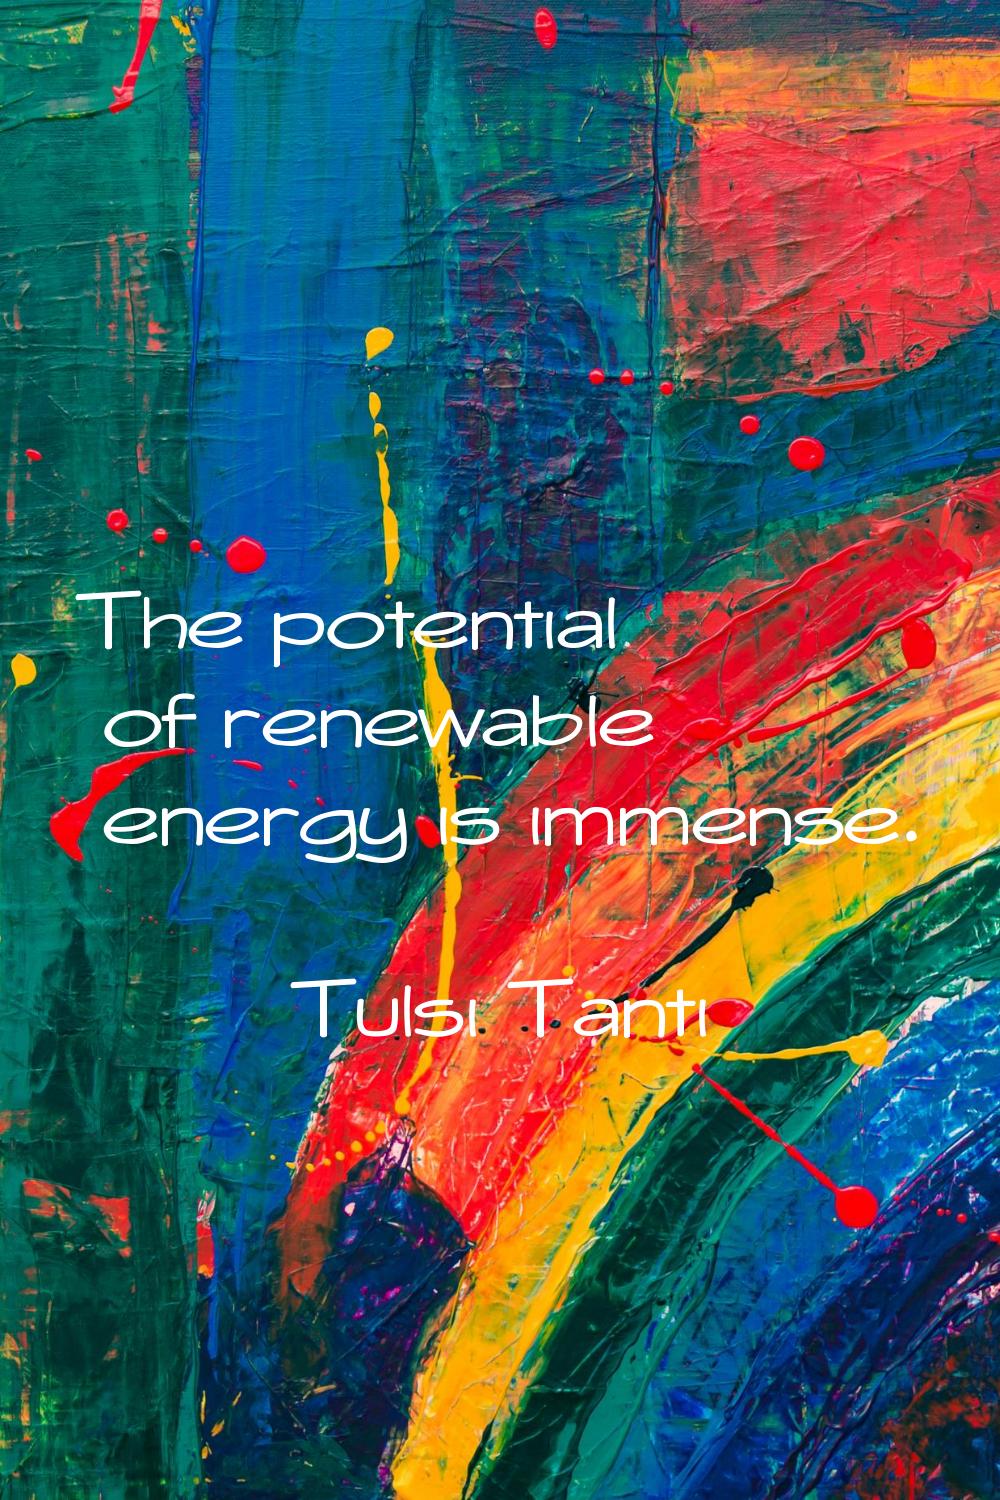 The potential of renewable energy is immense.